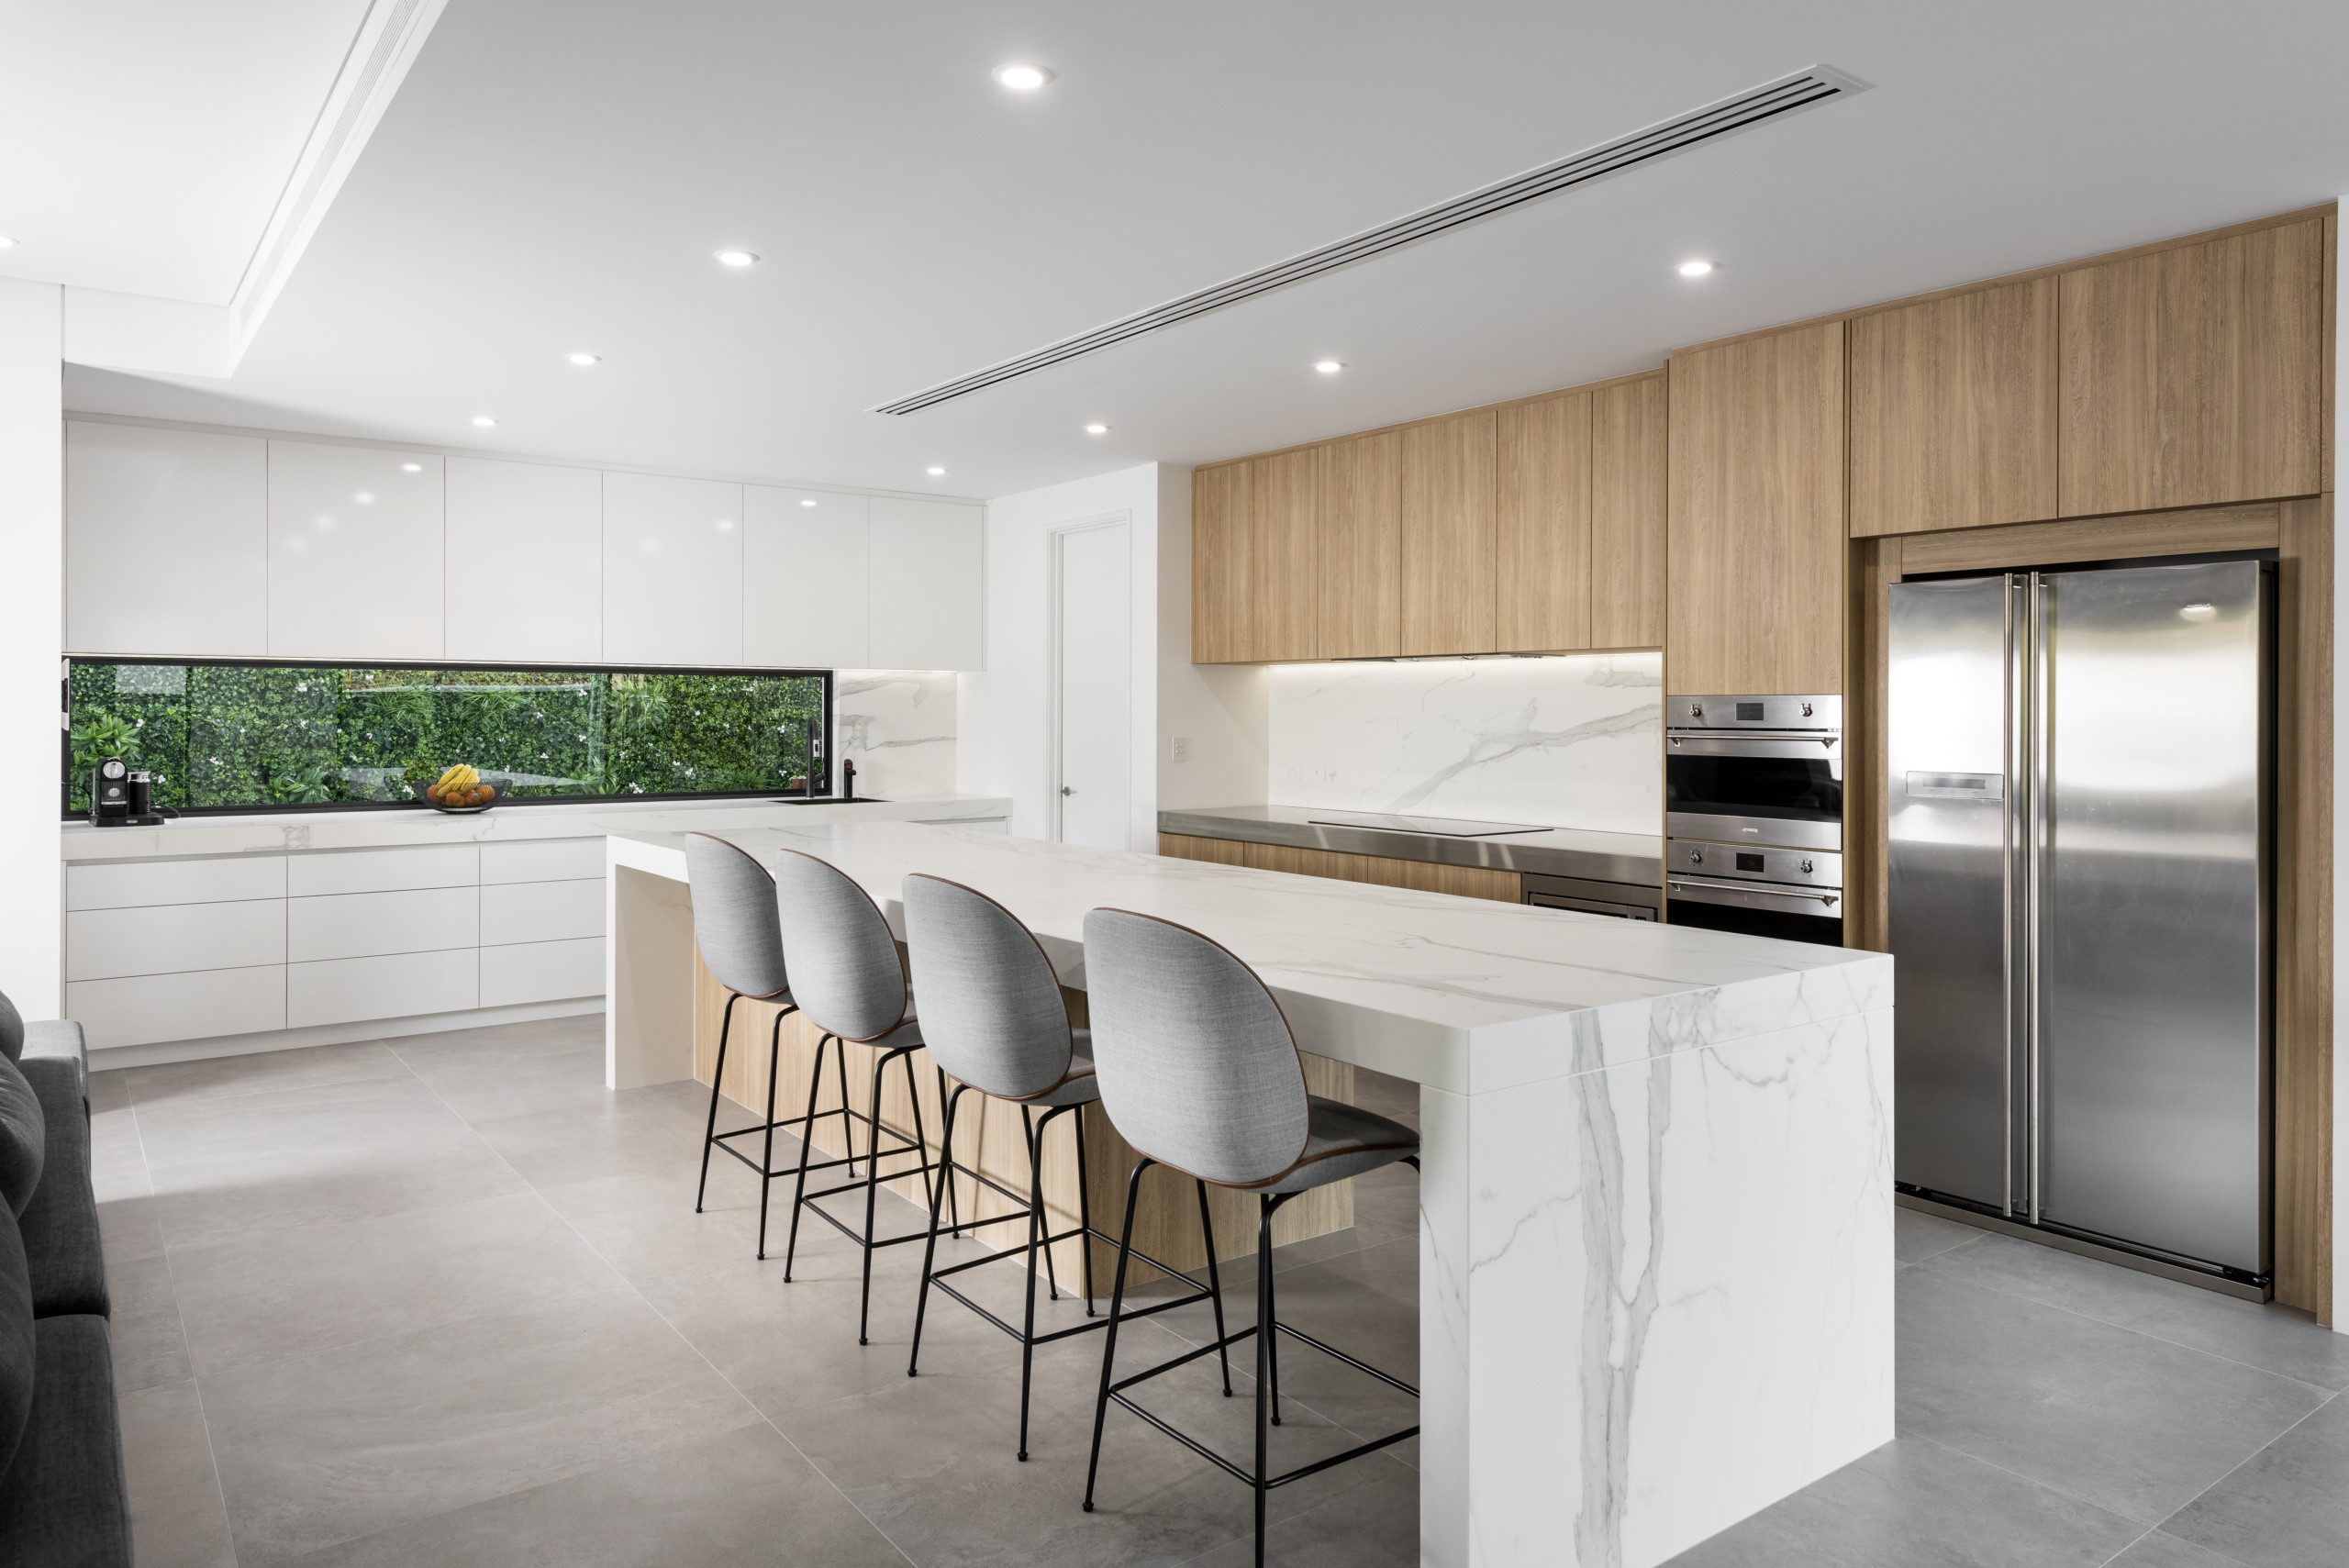 Modern looking kitchen with wood panel cabinets and marble island benchtop